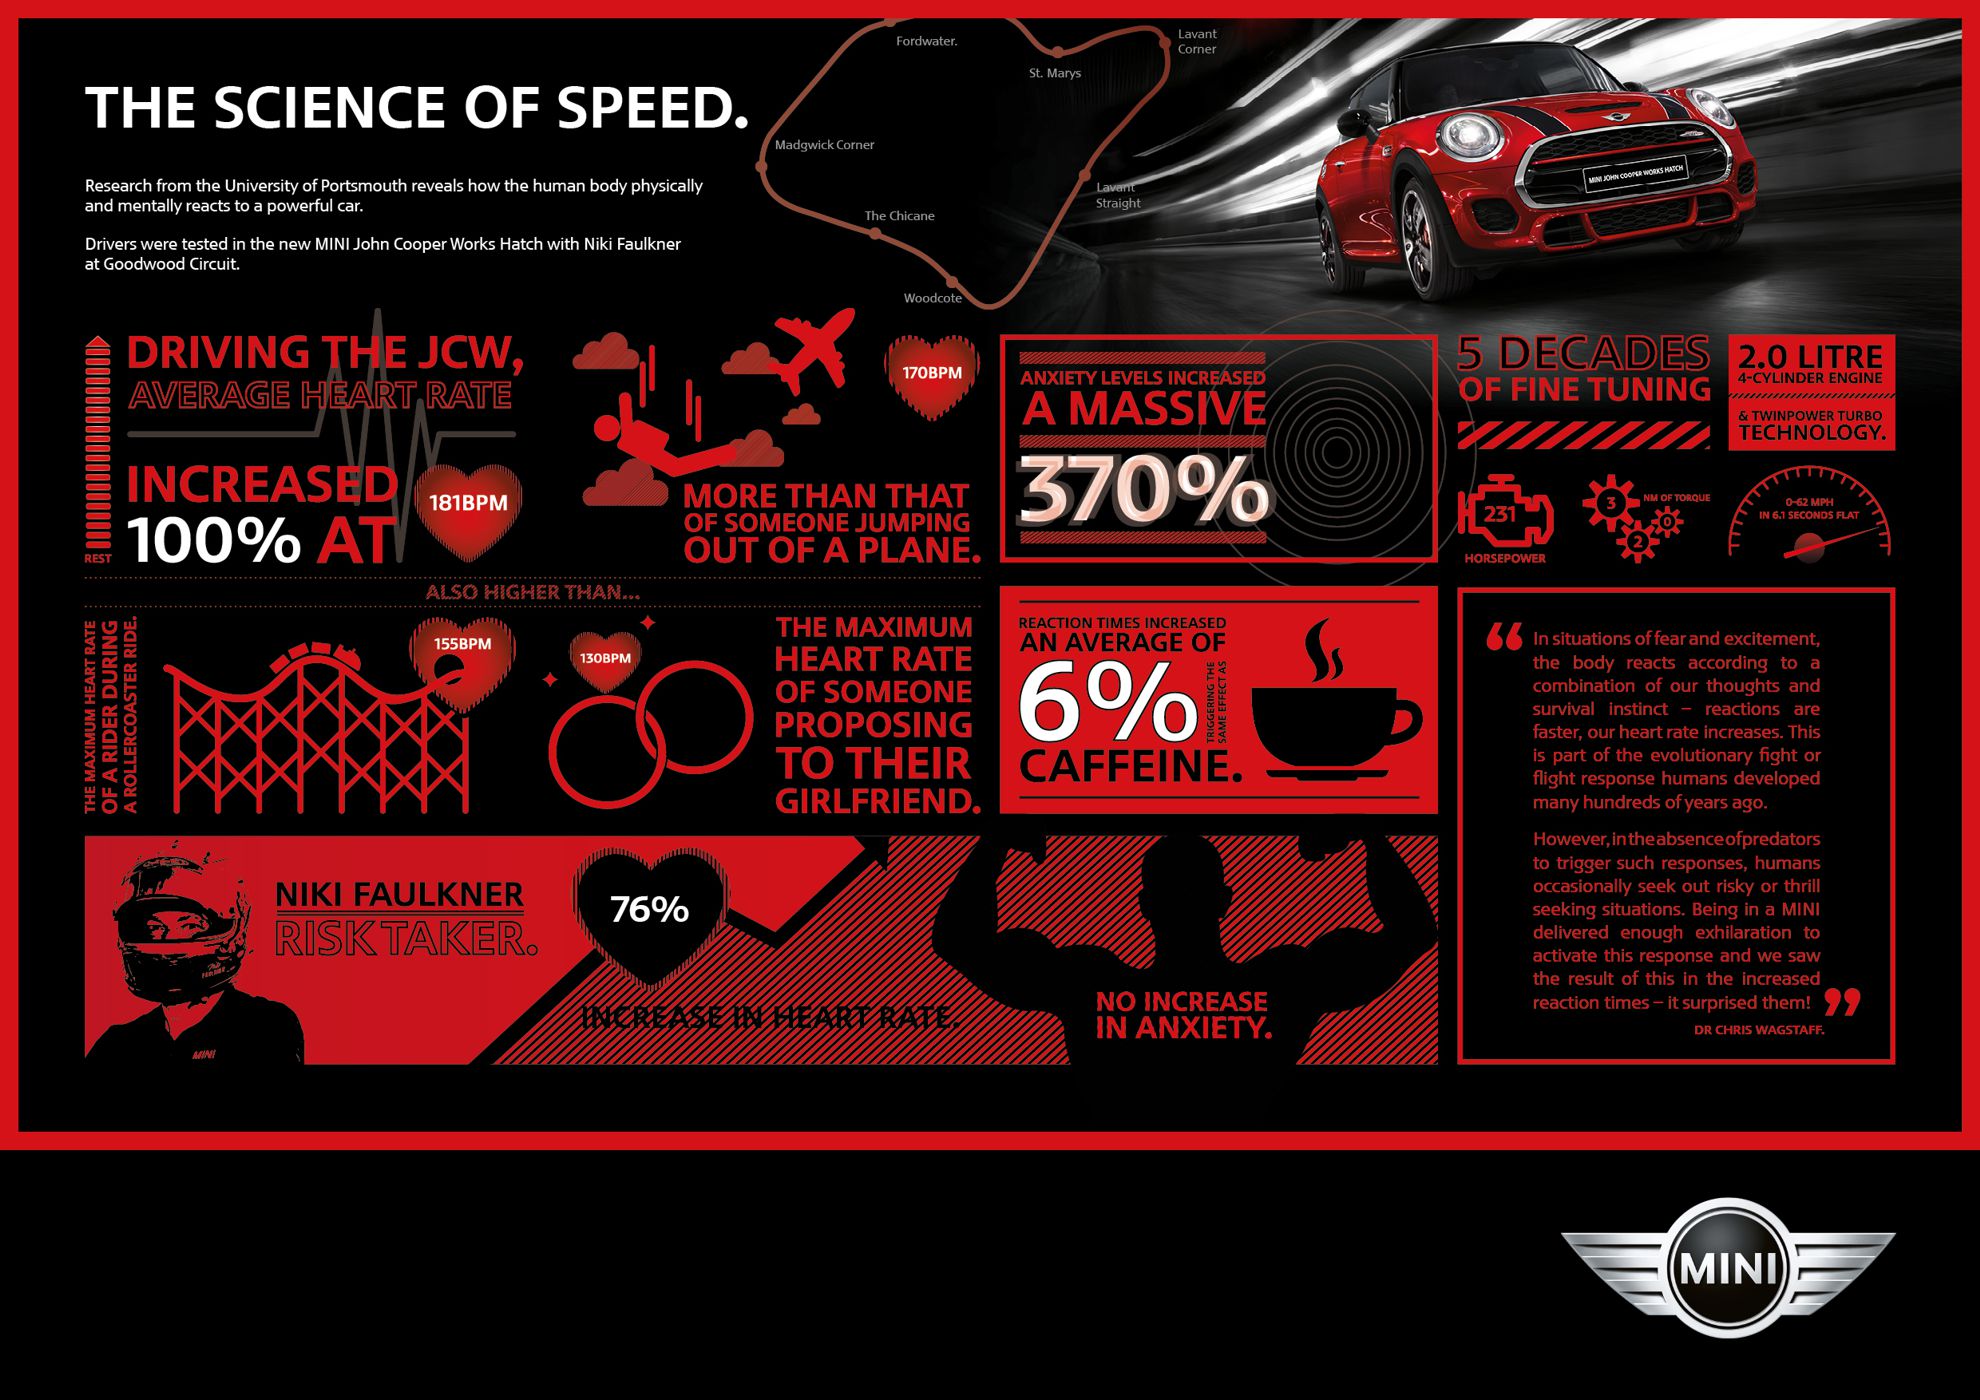 THE SCIENCE OF SPEED